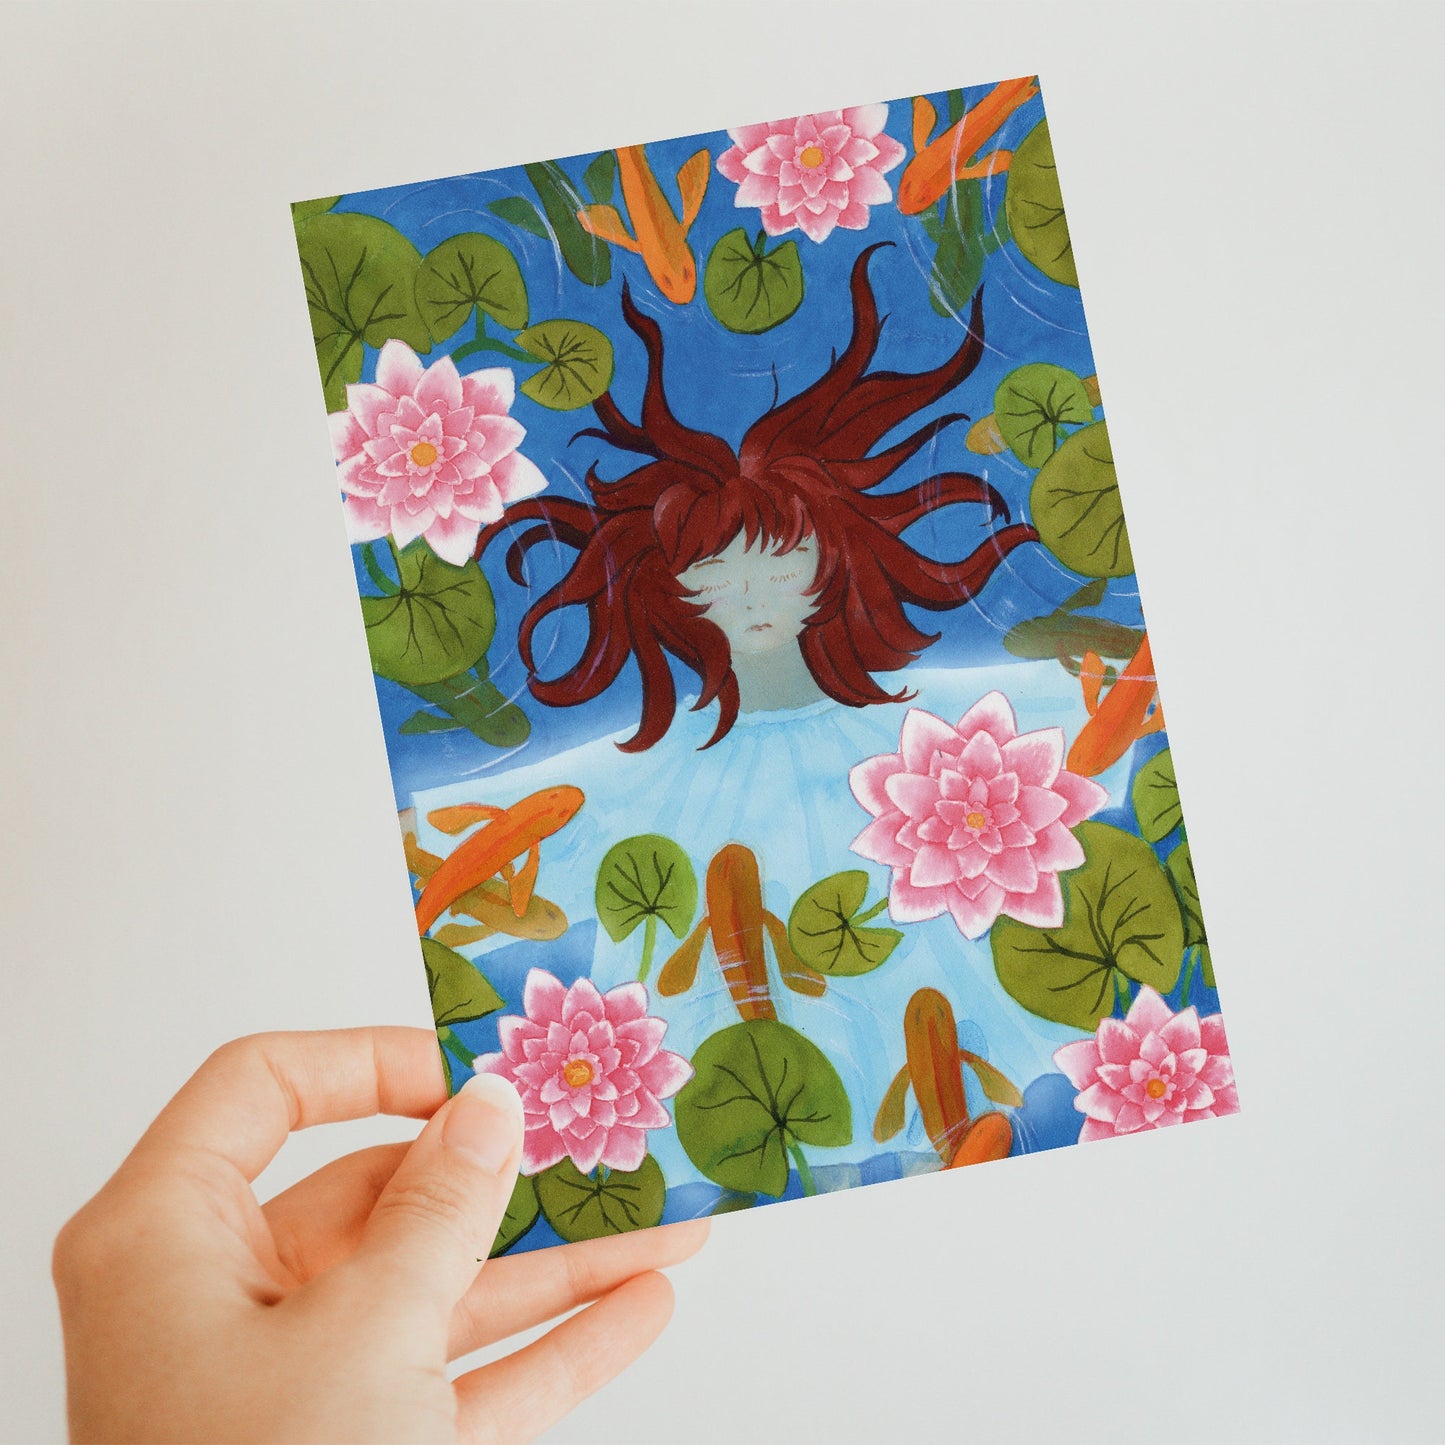 Postcard 'Waterlily Girl' with water lilies and goldfish